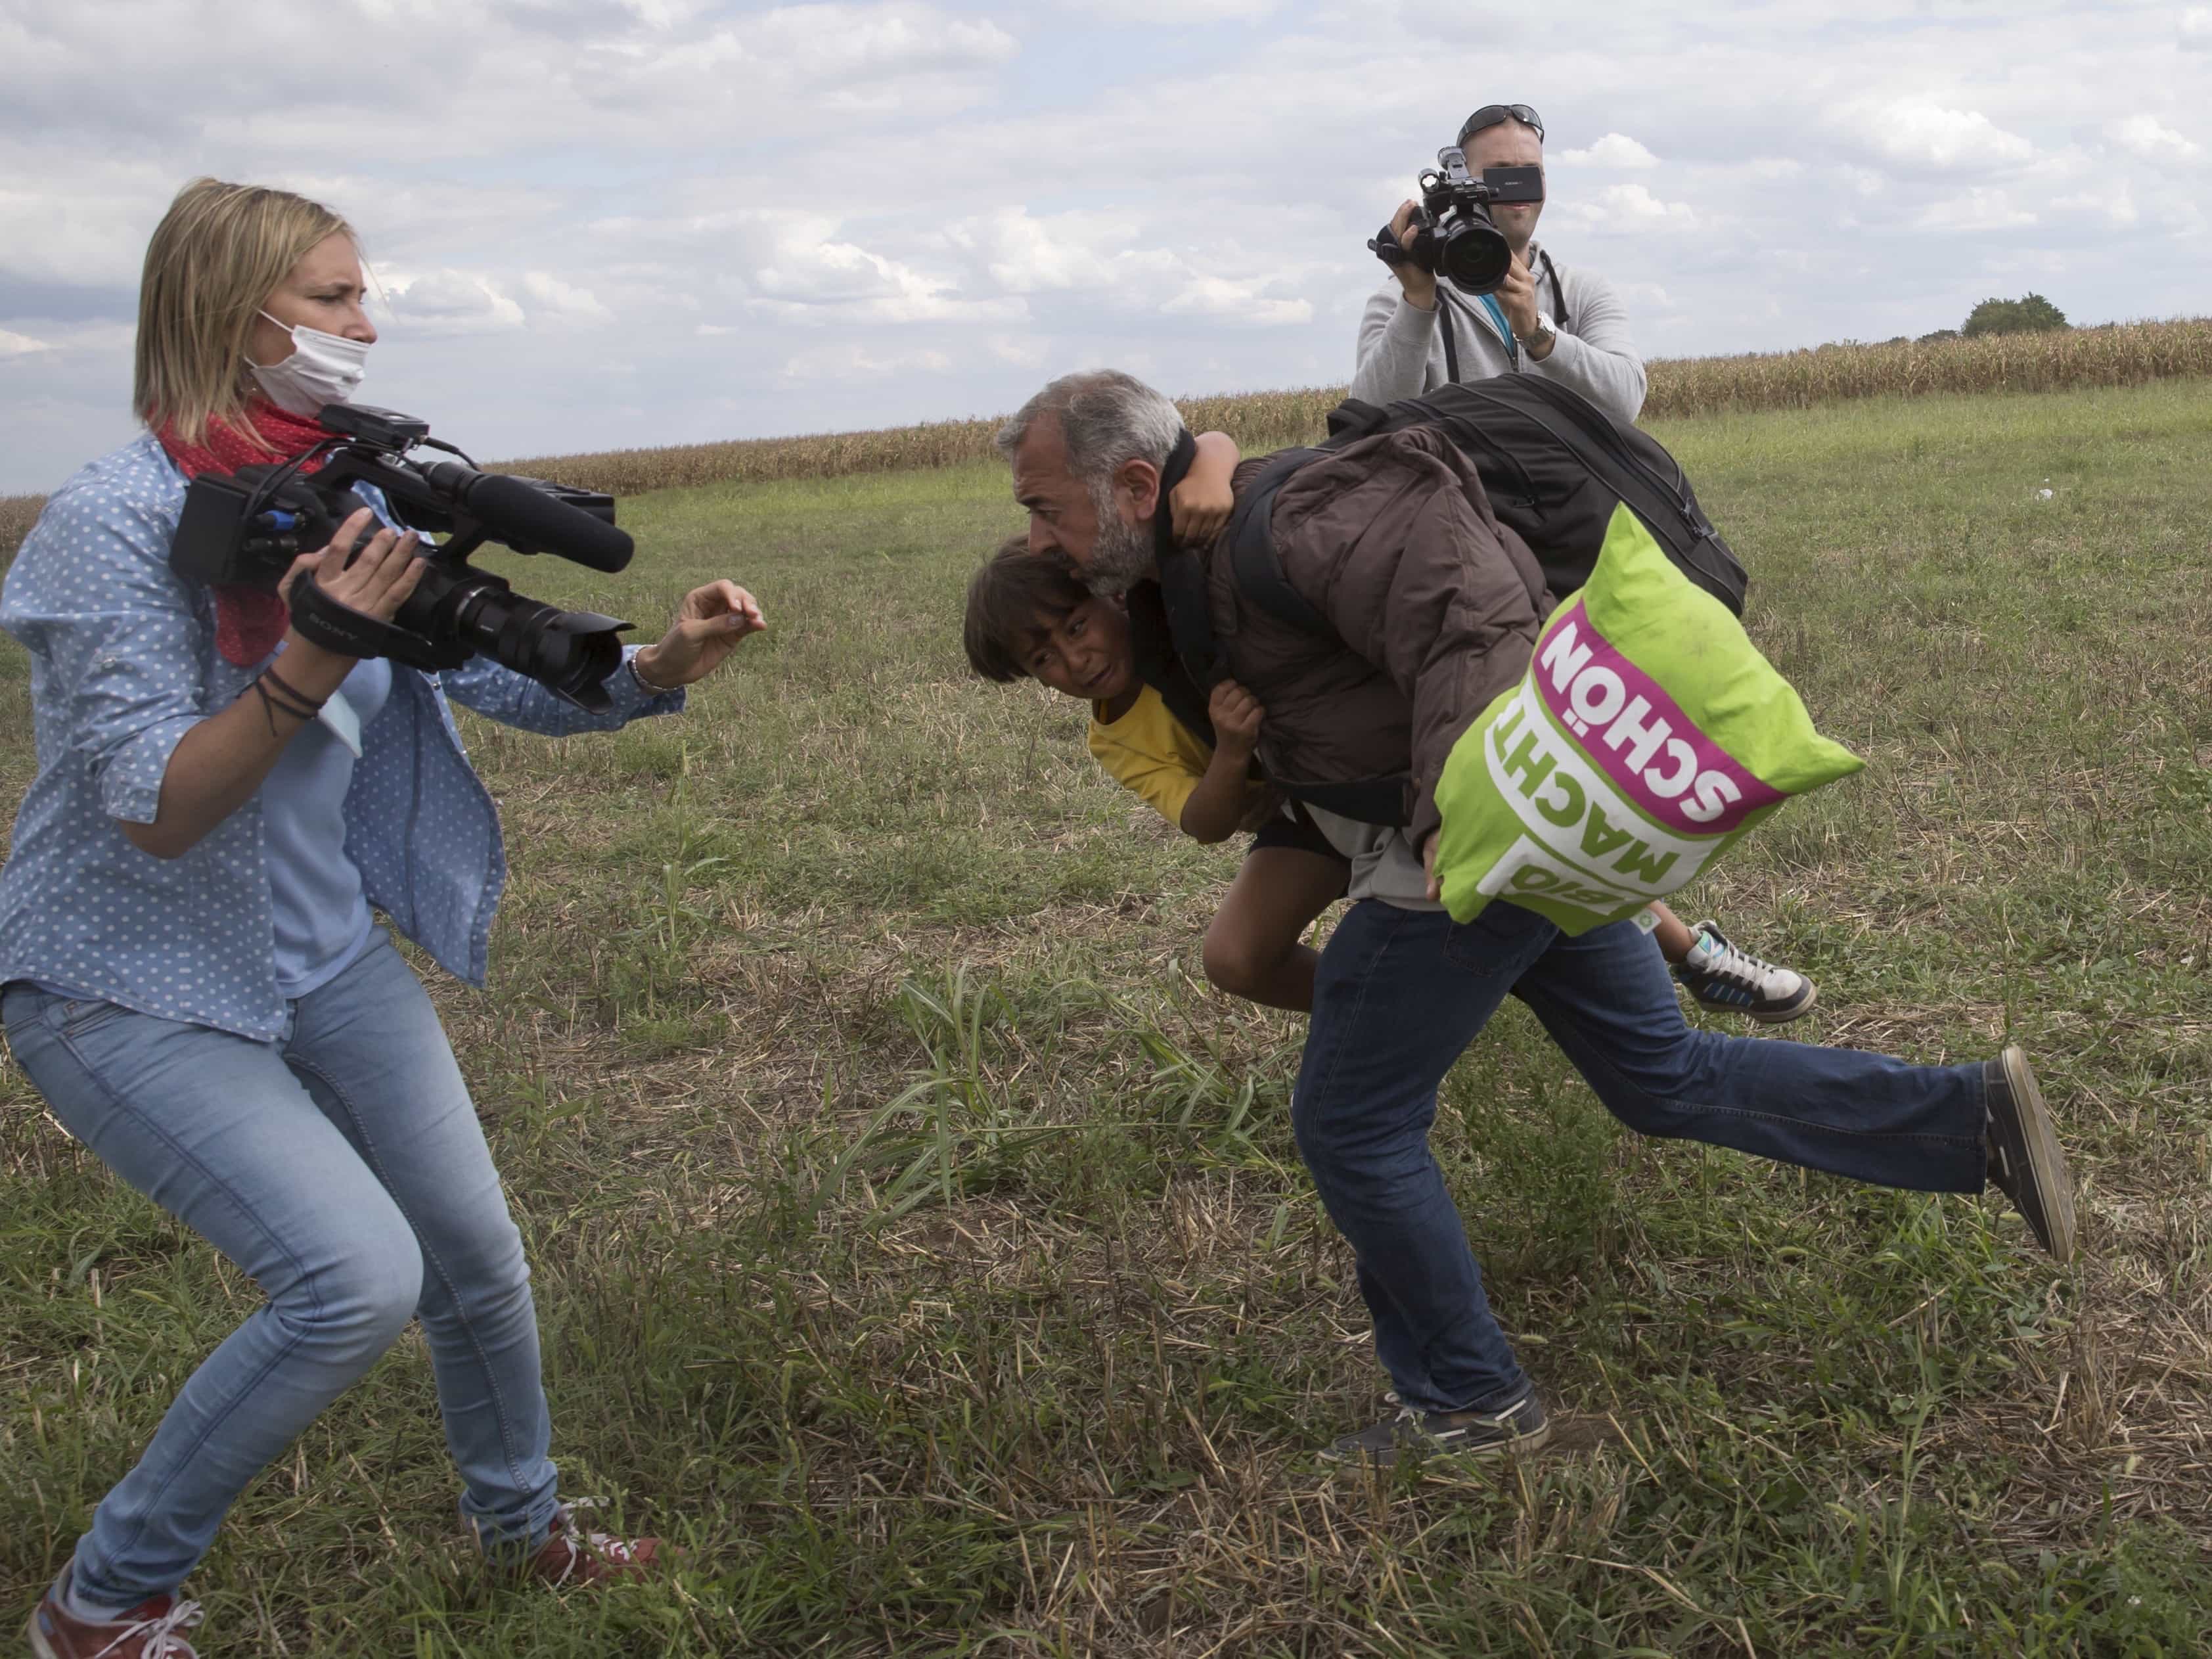 A migrant runs with a child before being tripped by TV camerawoman Petra Laszlo (L) and falling as he tries to escape from a collection point in Roszke village, Hungary, 8 September 2015. , REUTERS/Marko Djurica